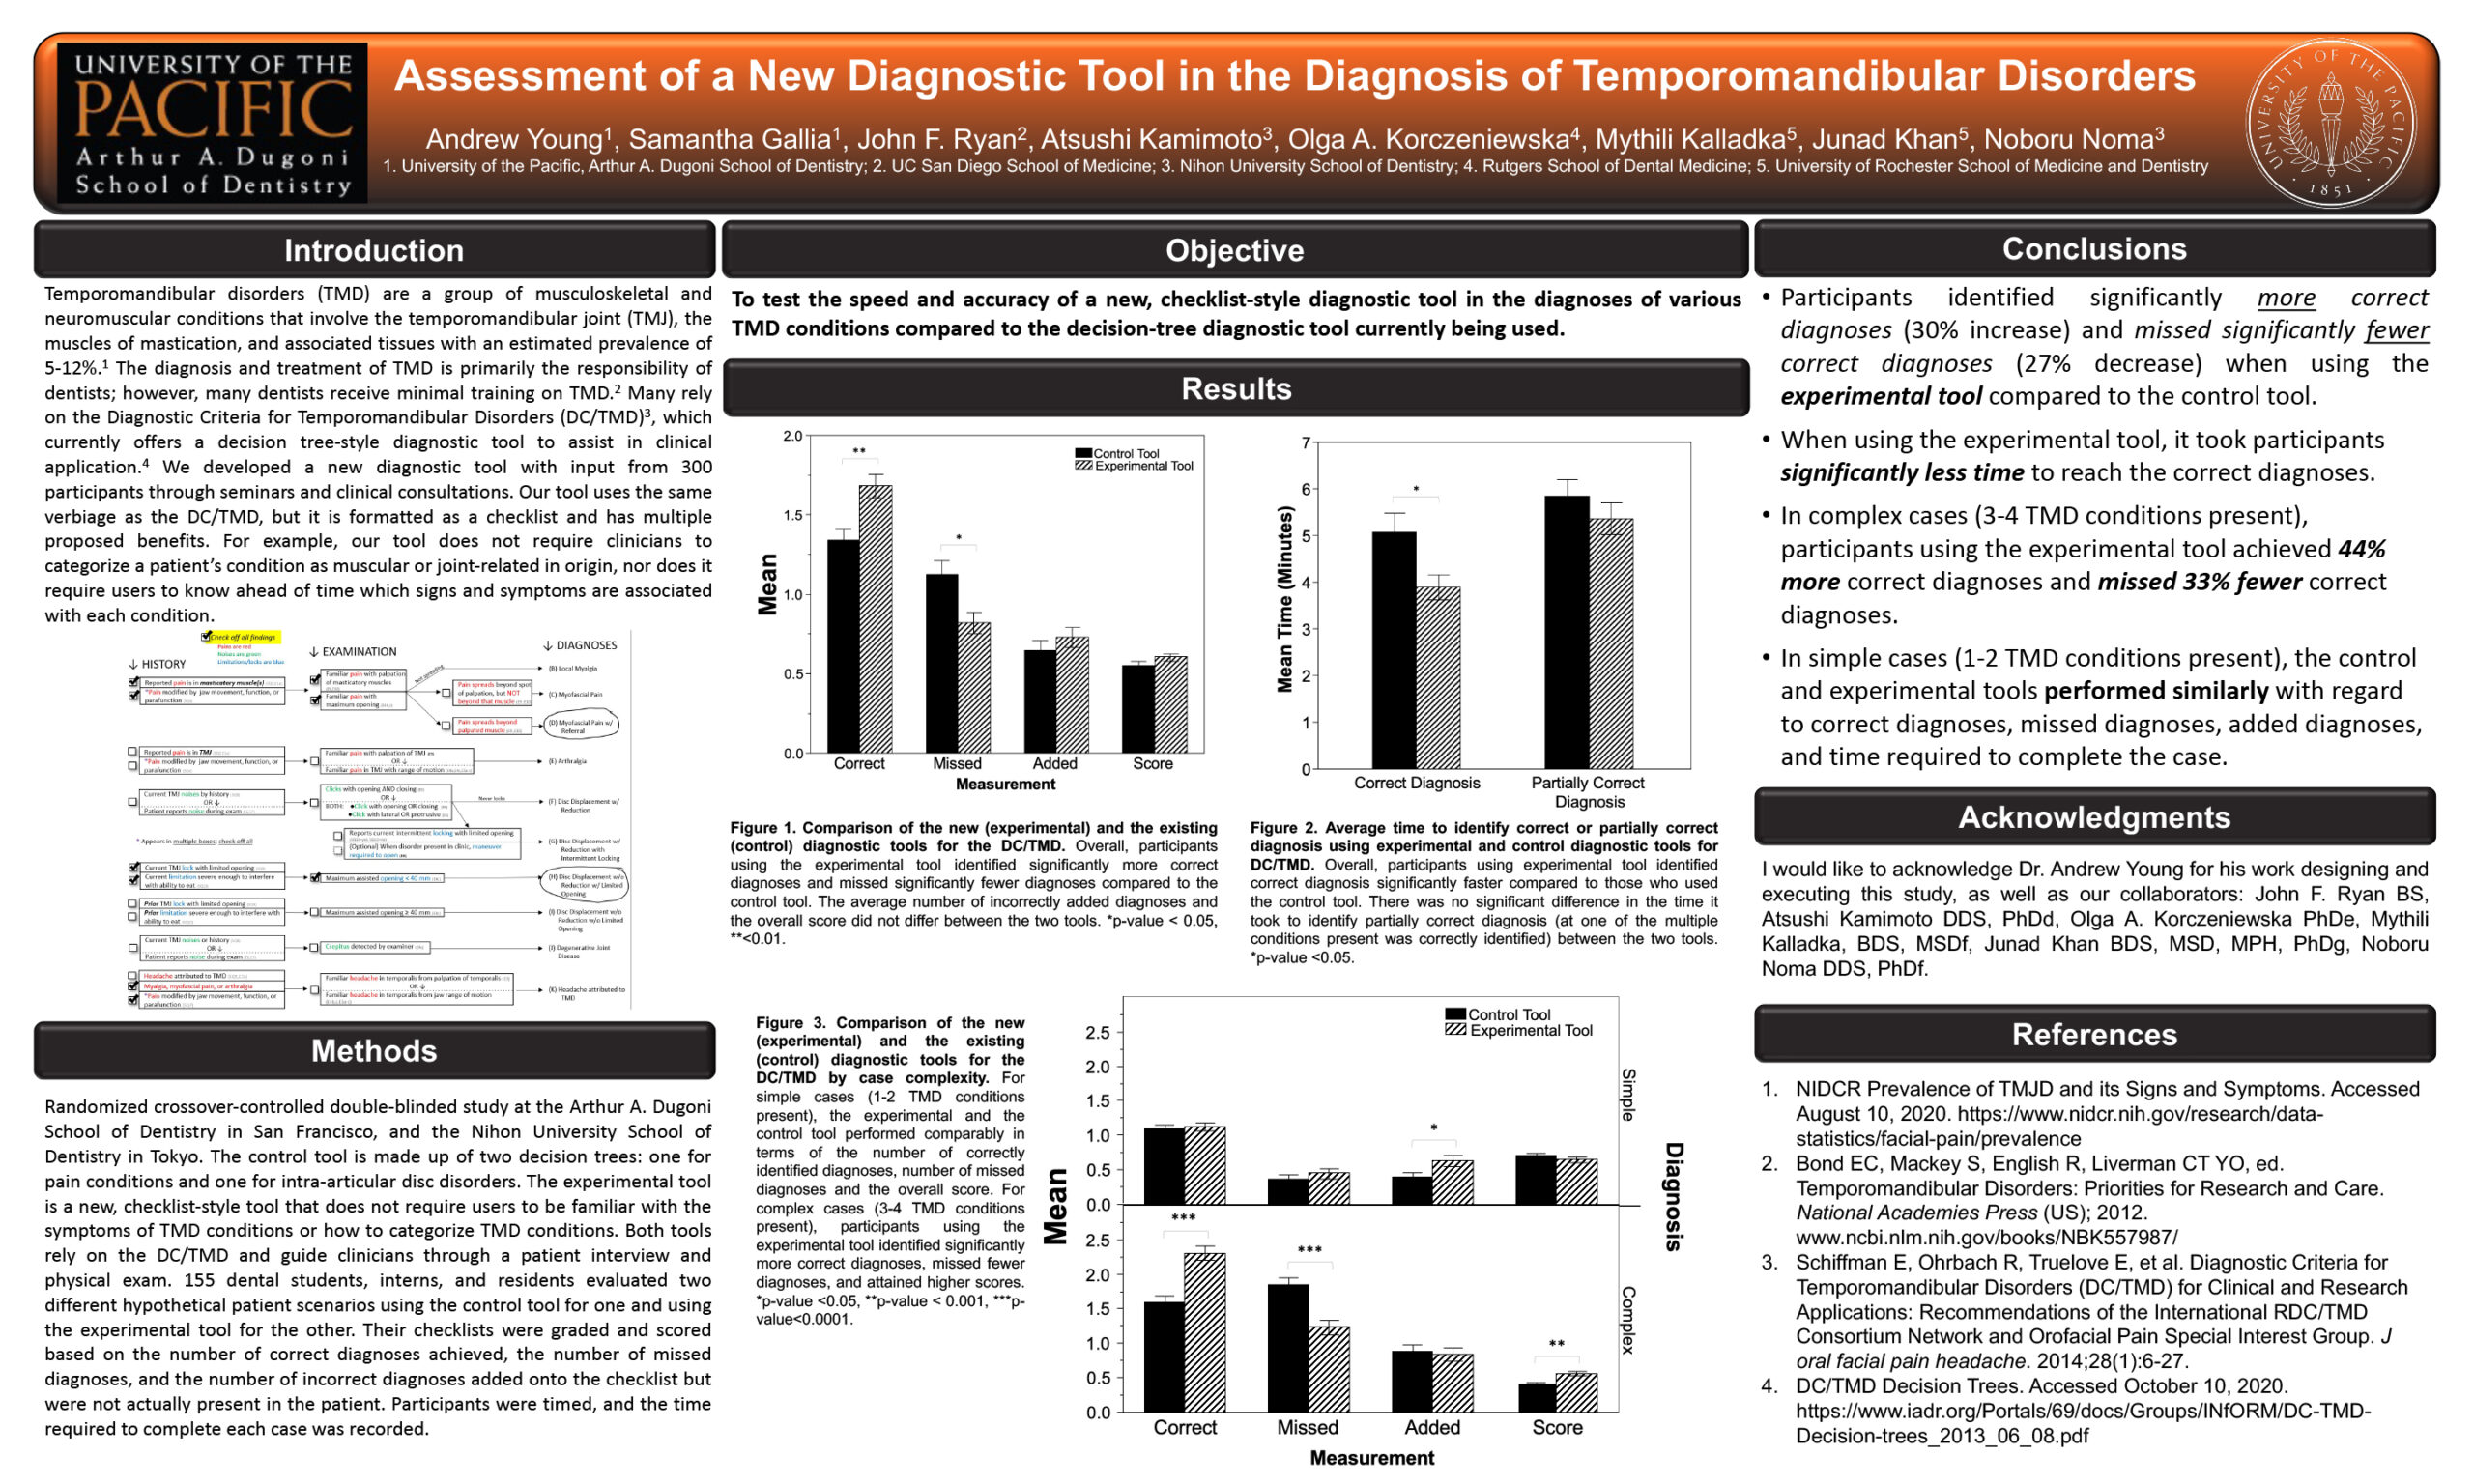 Assessment of a New Diagnostic Tool in the Diagnosis of Temporomandibular Disorders